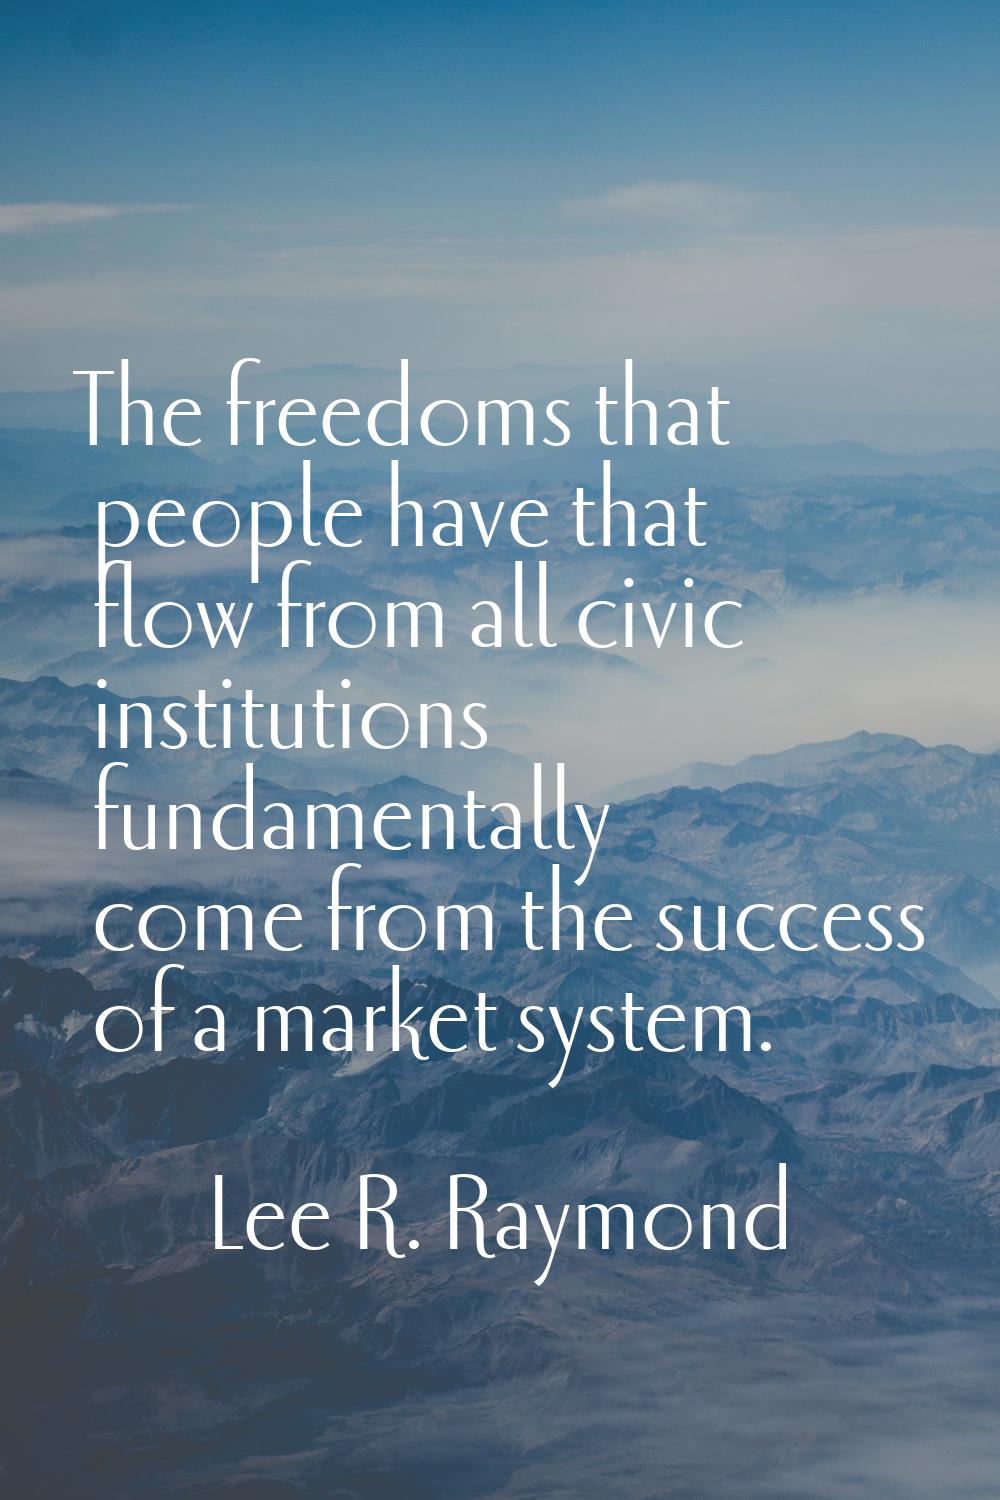 The freedoms that people have that flow from all civic institutions fundamentally come from the suc